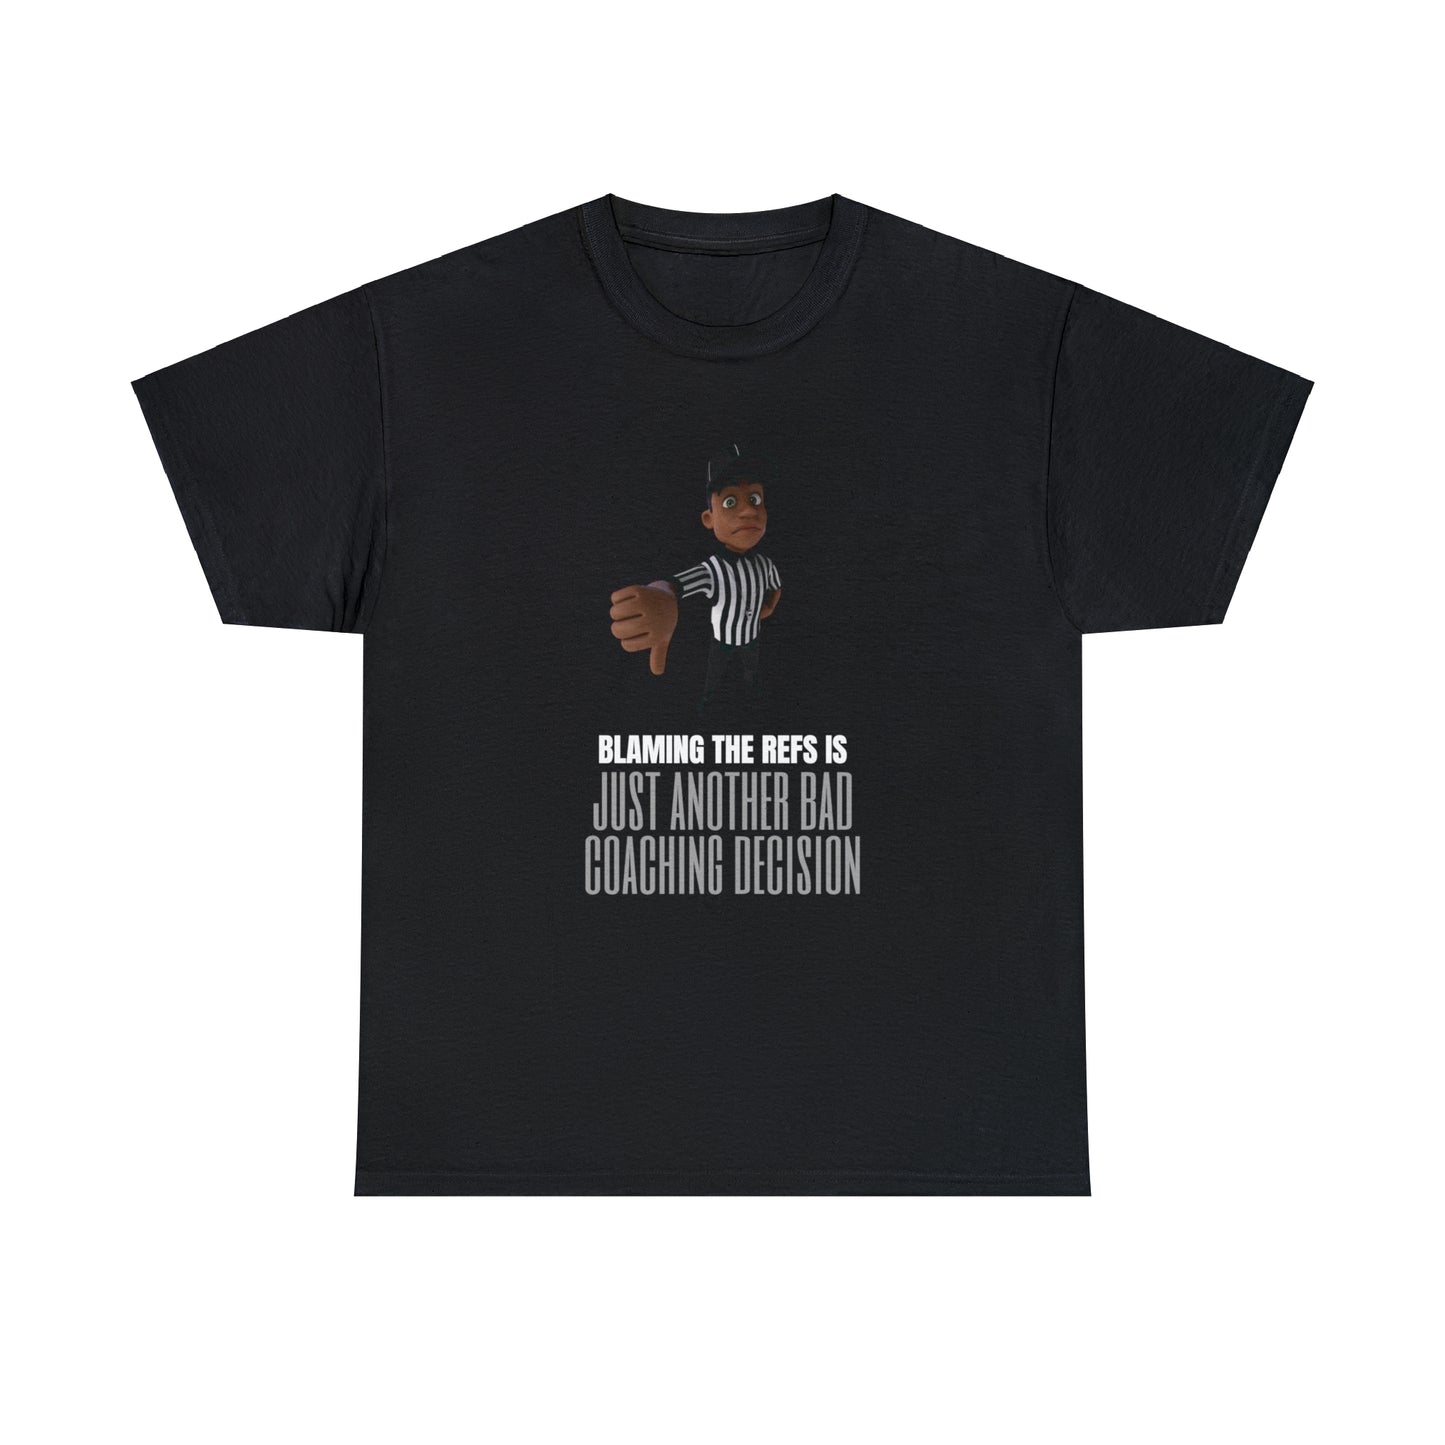 Bad Coaching Decision Unisex Heavy Cotton Tee For Referees | Shirt for Refs | Great Gift for Officials